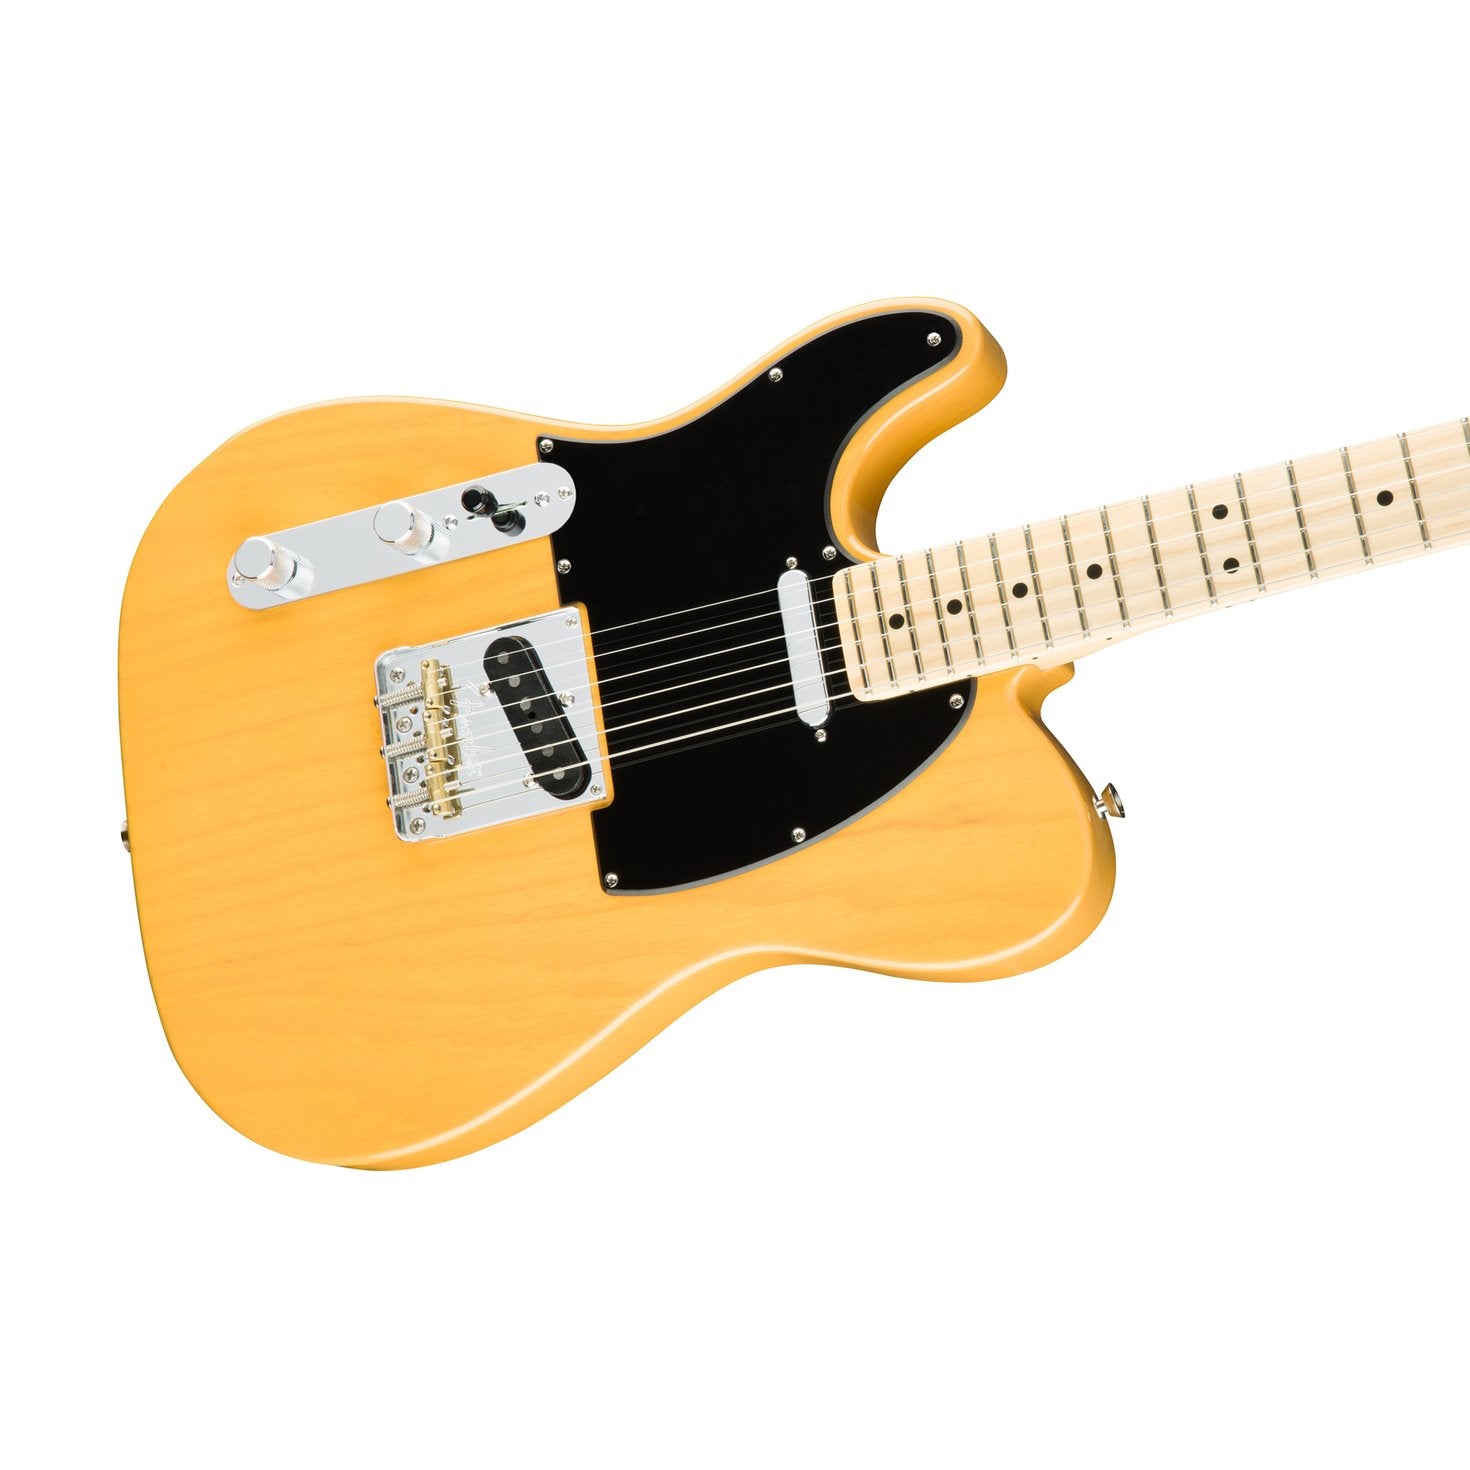 Fender American Professional Telecaster Left-Handed Electric Guitar, Maple FB, Butterscotch Blonde, FENDER, ELECTRIC GUITAR, fender-electric-guitar-f03-011-3072-750, ZOSO MUSIC SDN BHD